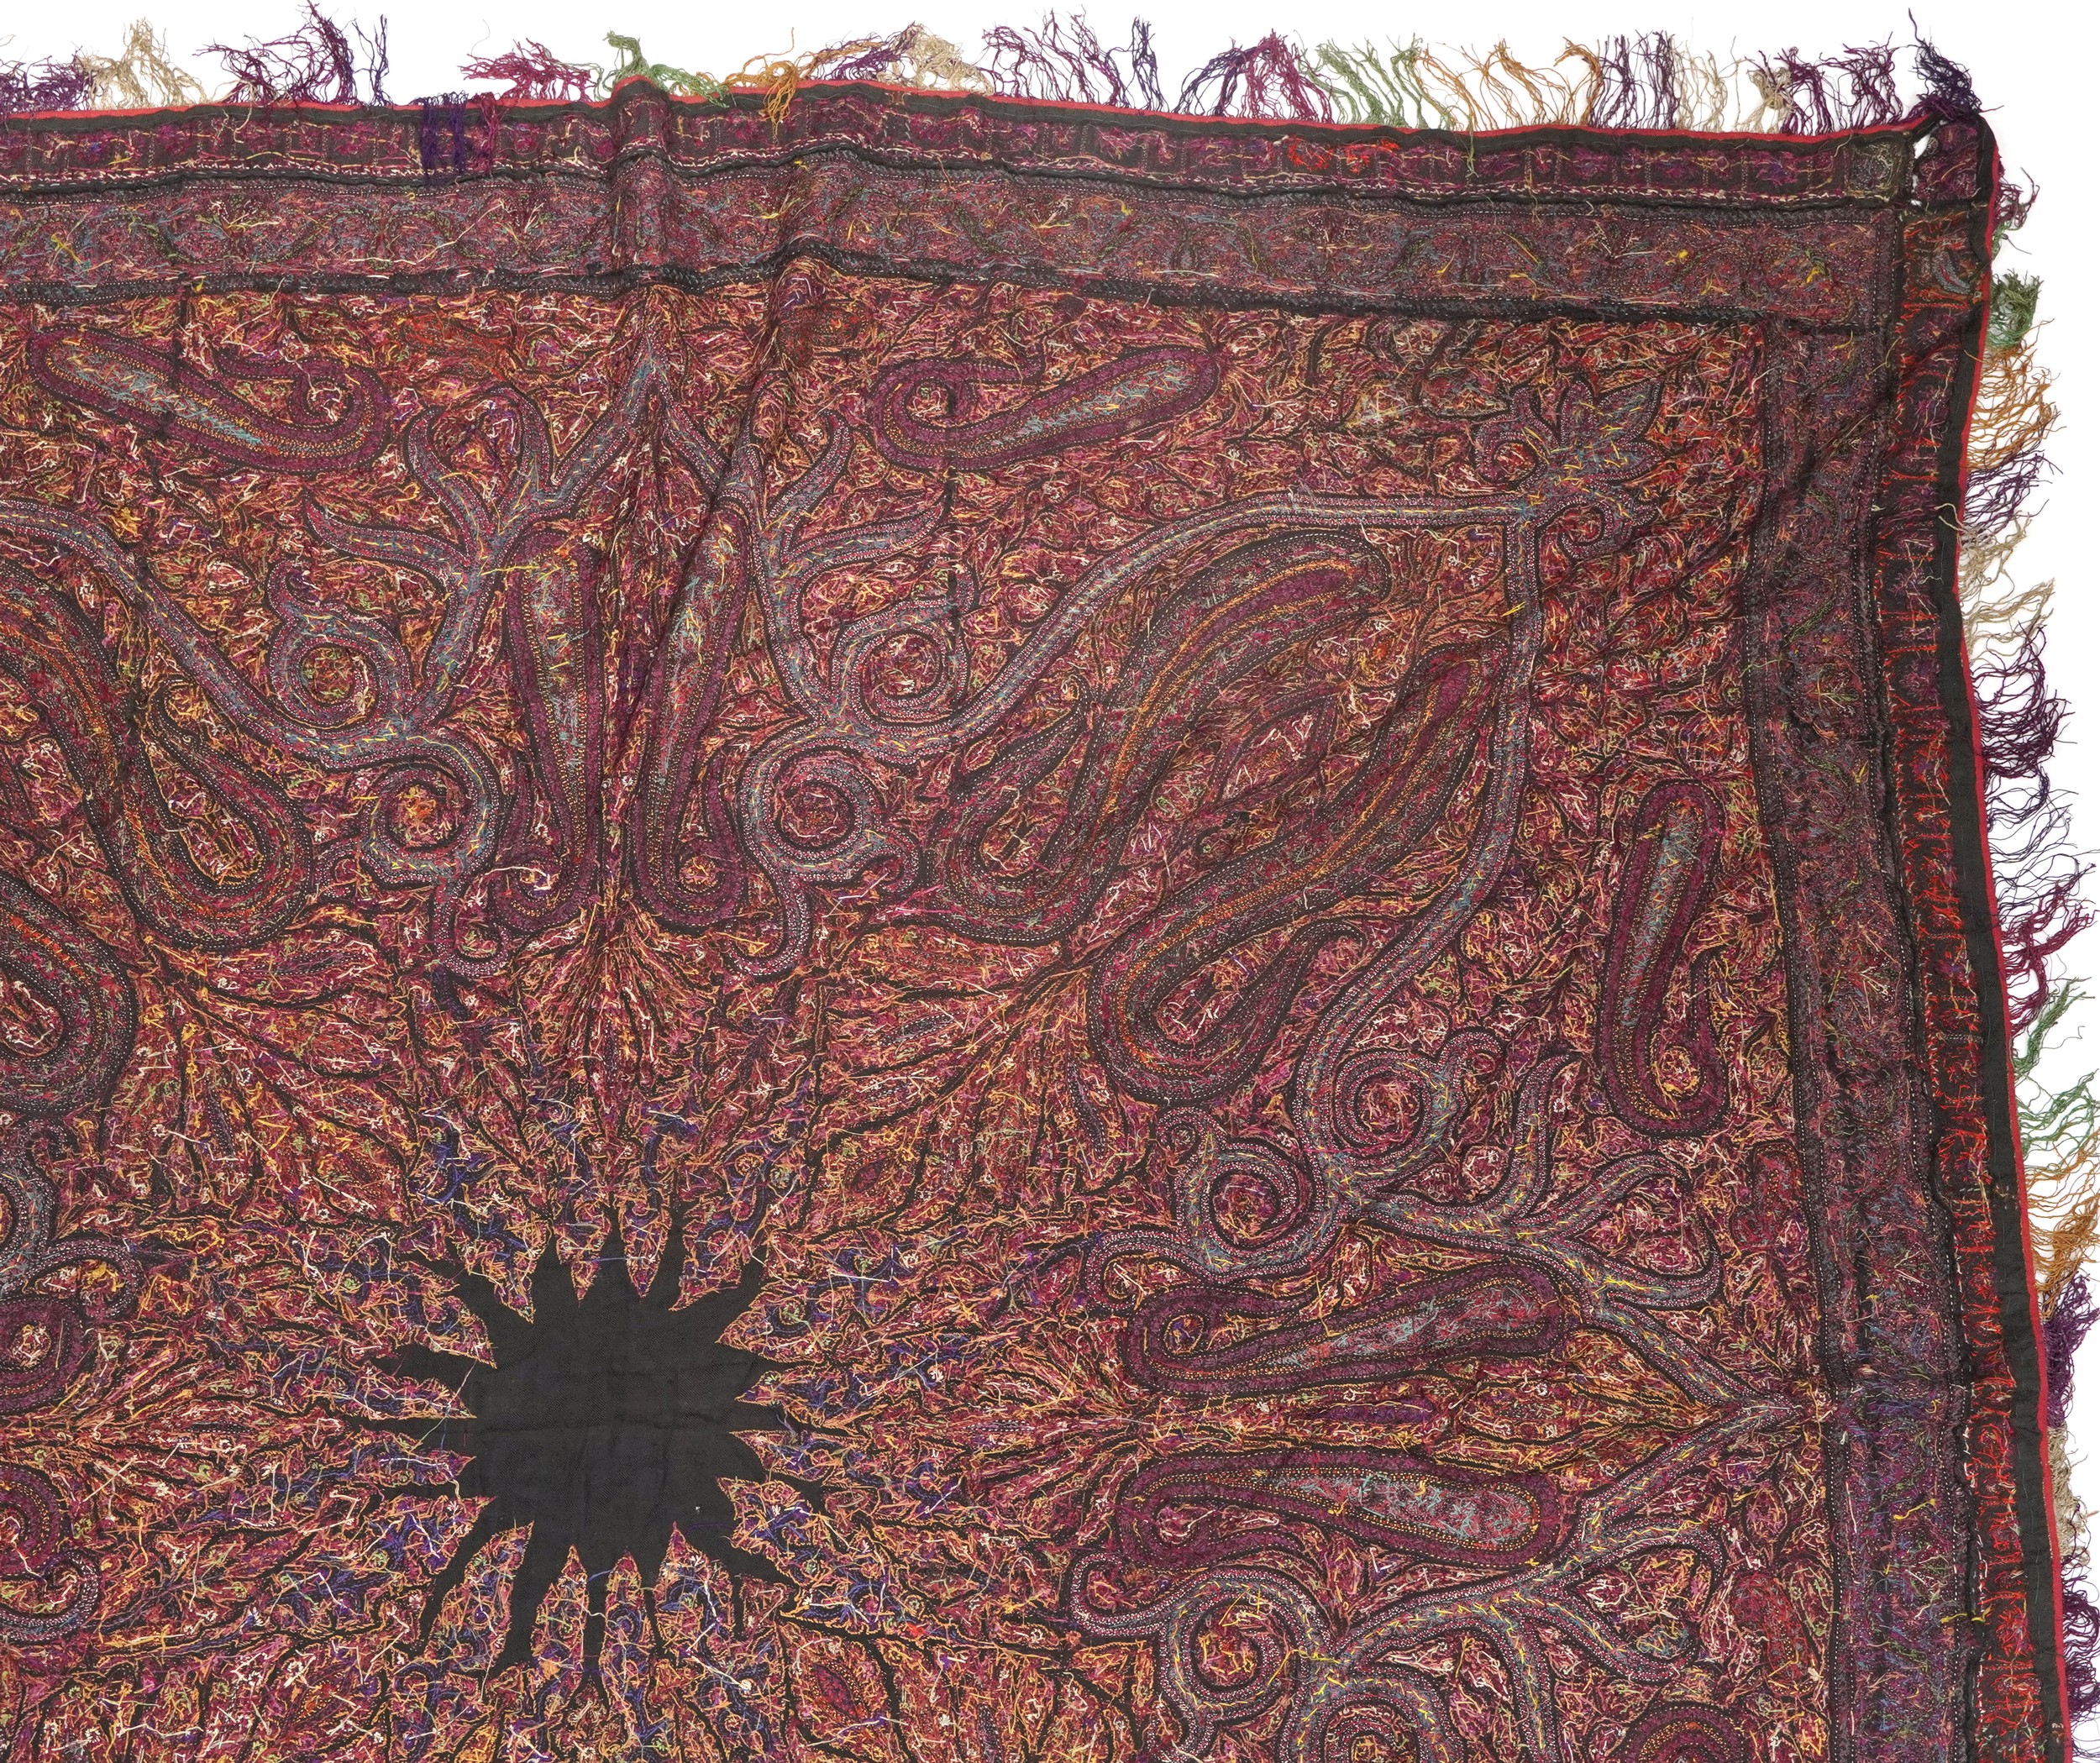 19th century Indian Kashmir/cashmere textile or shawl, 170cm x 170cm : For further information on - Image 10 of 12